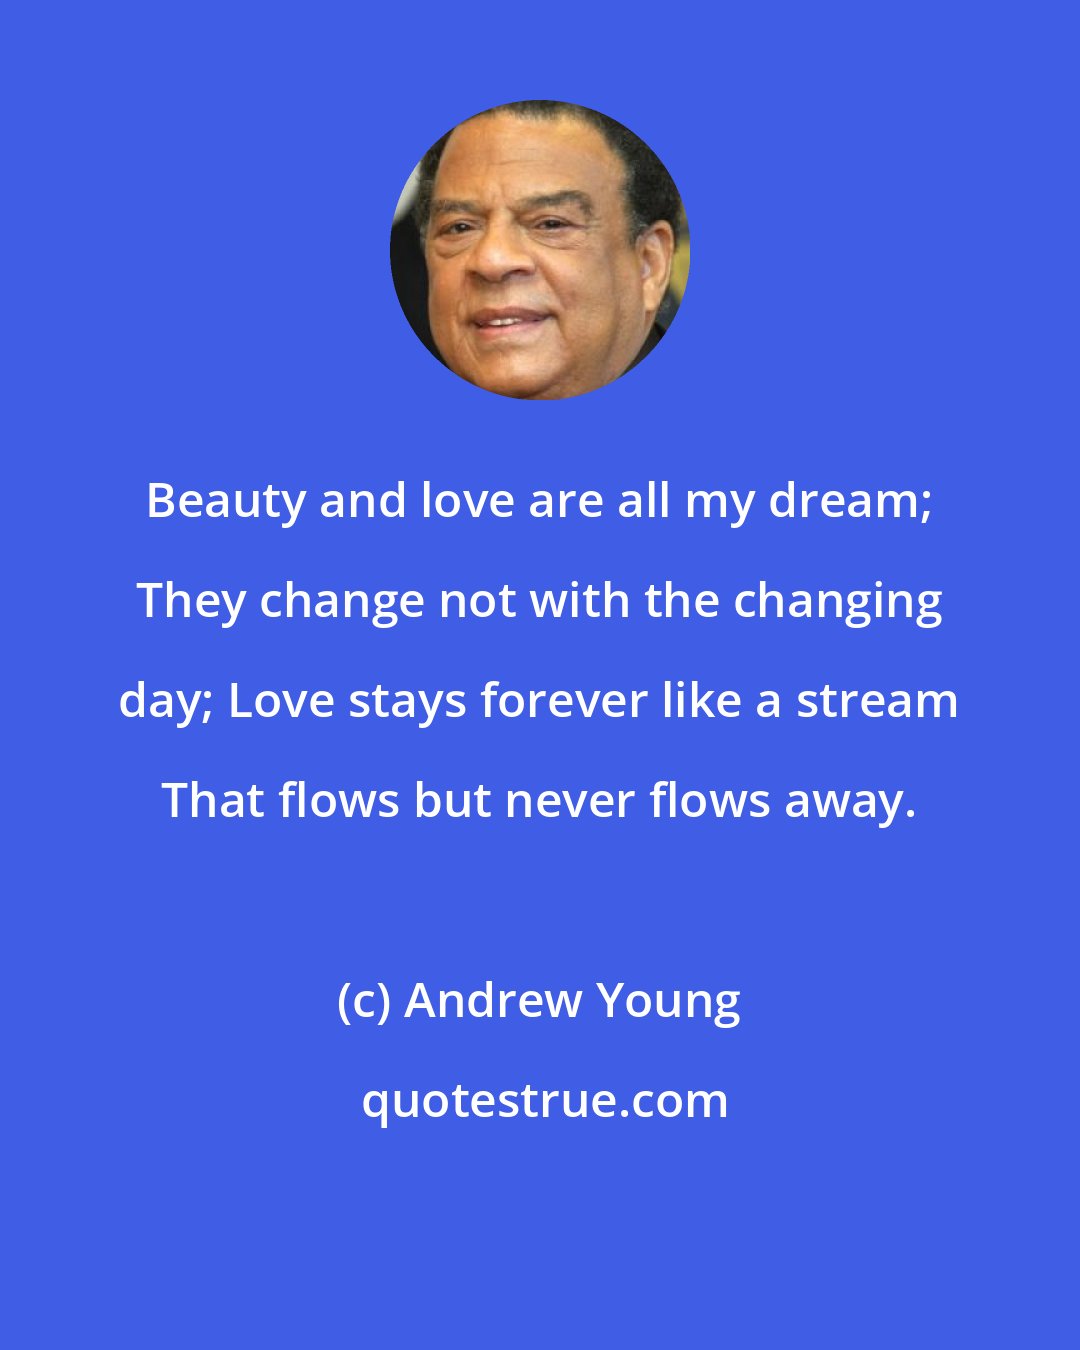 Andrew Young: Beauty and love are all my dream; They change not with the changing day; Love stays forever like a stream That flows but never flows away.